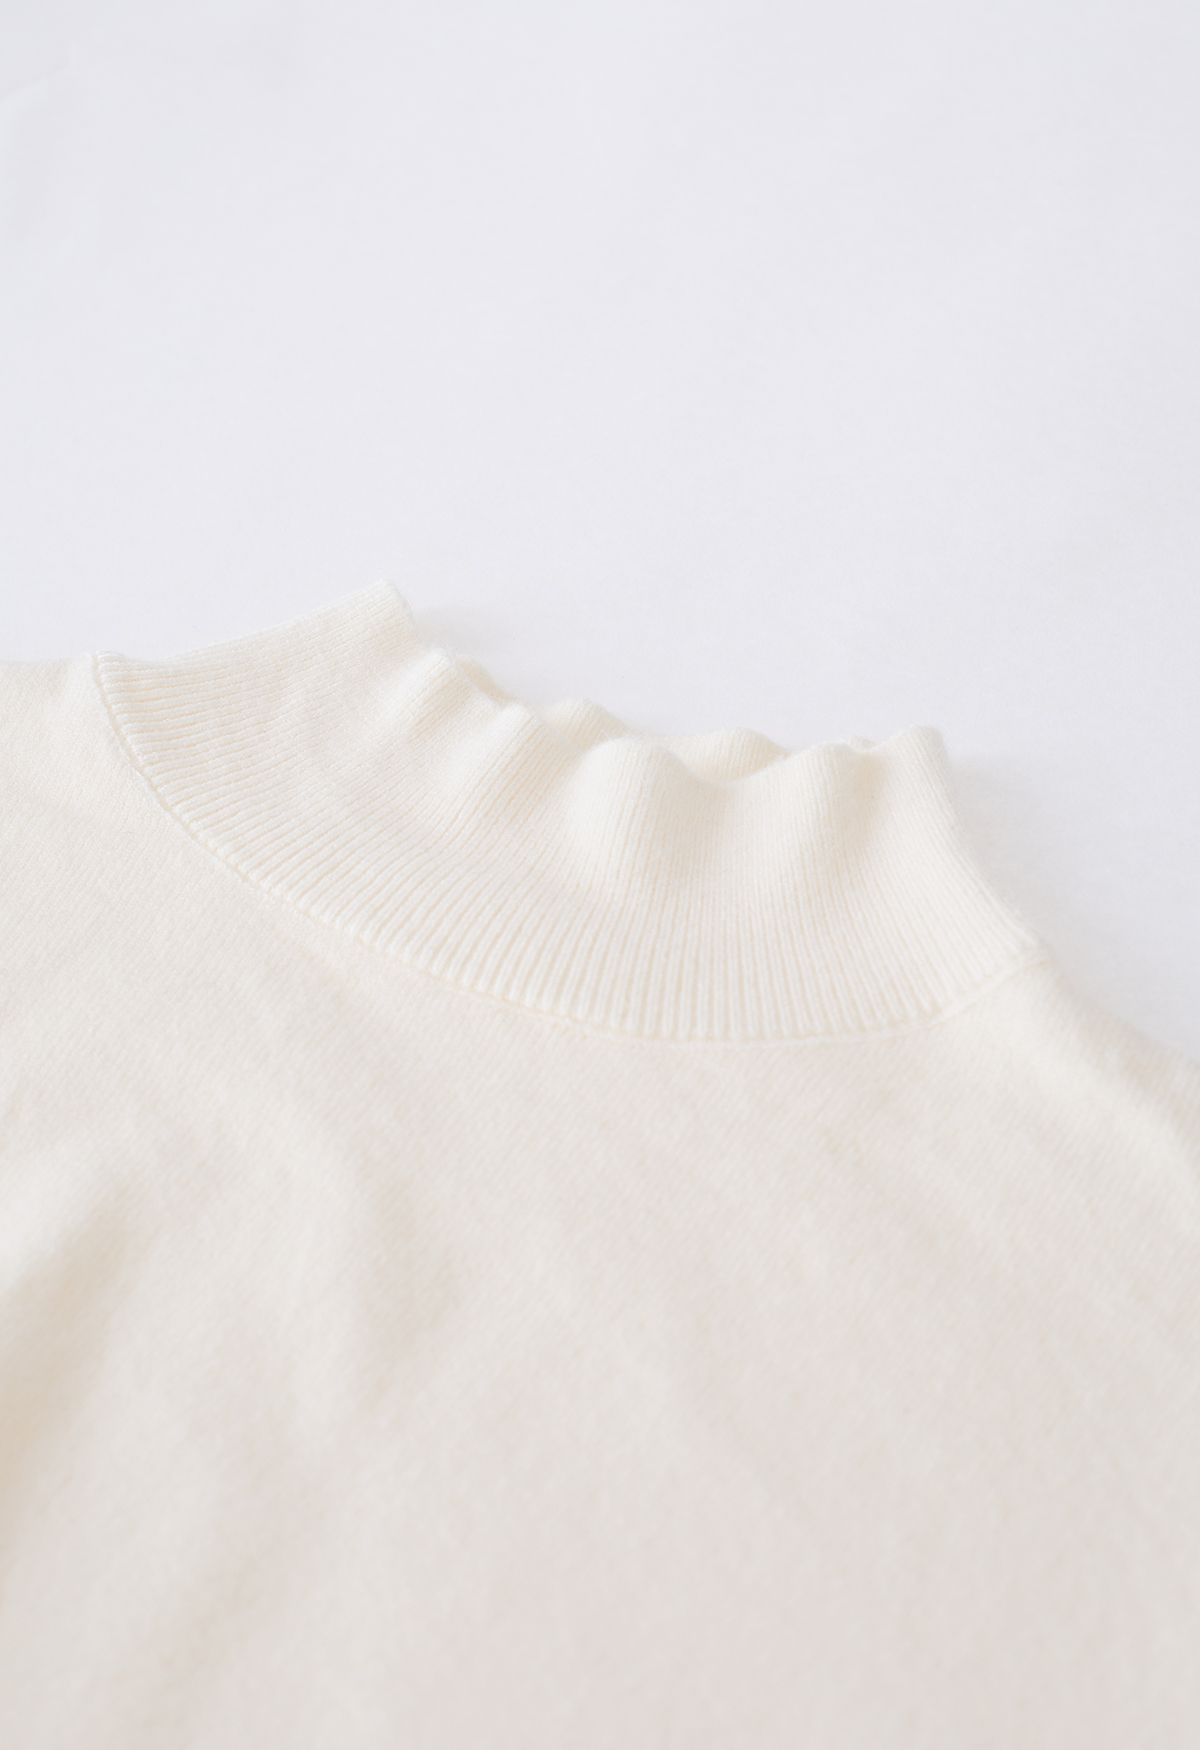 Simple Mock Neck Knit Top in Cream